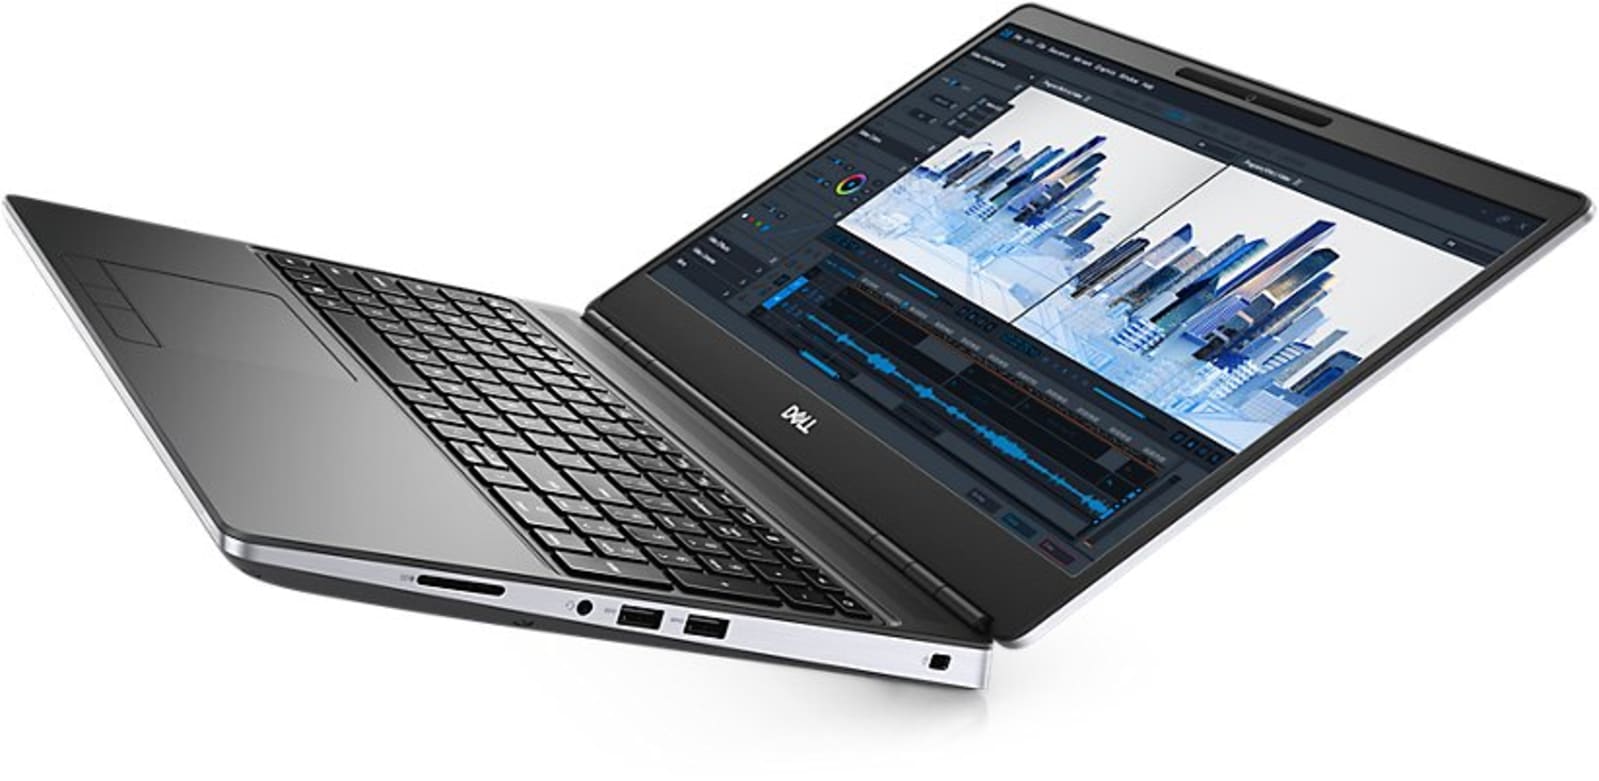 Restored Dell Precision 7000 7560 Workstation Laptop (2021) | 15.6" FHD | Core i5 - 512GB SSD - 64GB RAM - Nvidia T1200 | 6 Cores @ 4.6 GHz - 11th Gen CPU (Refurbished) - image 4 of 11